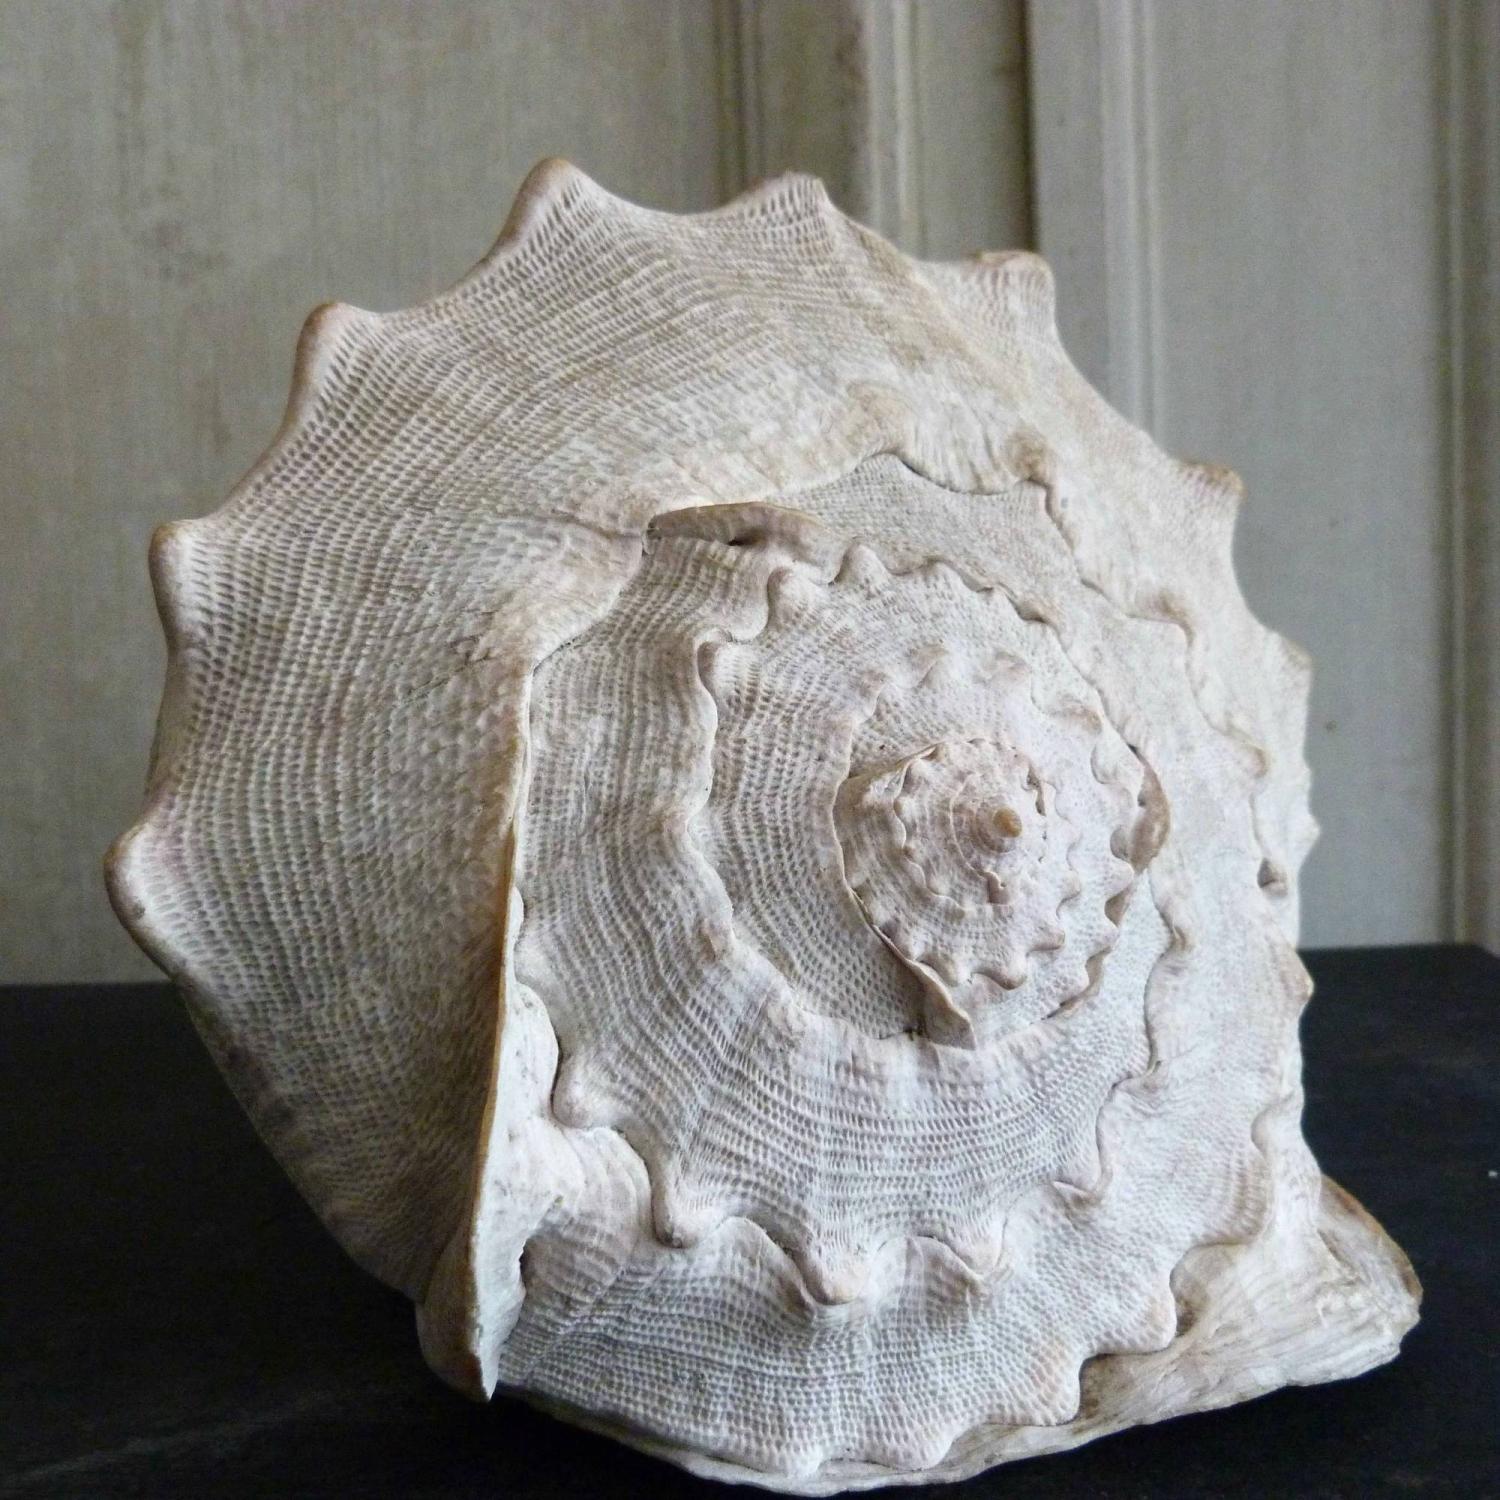 VERY LARGE CONCH SHELL